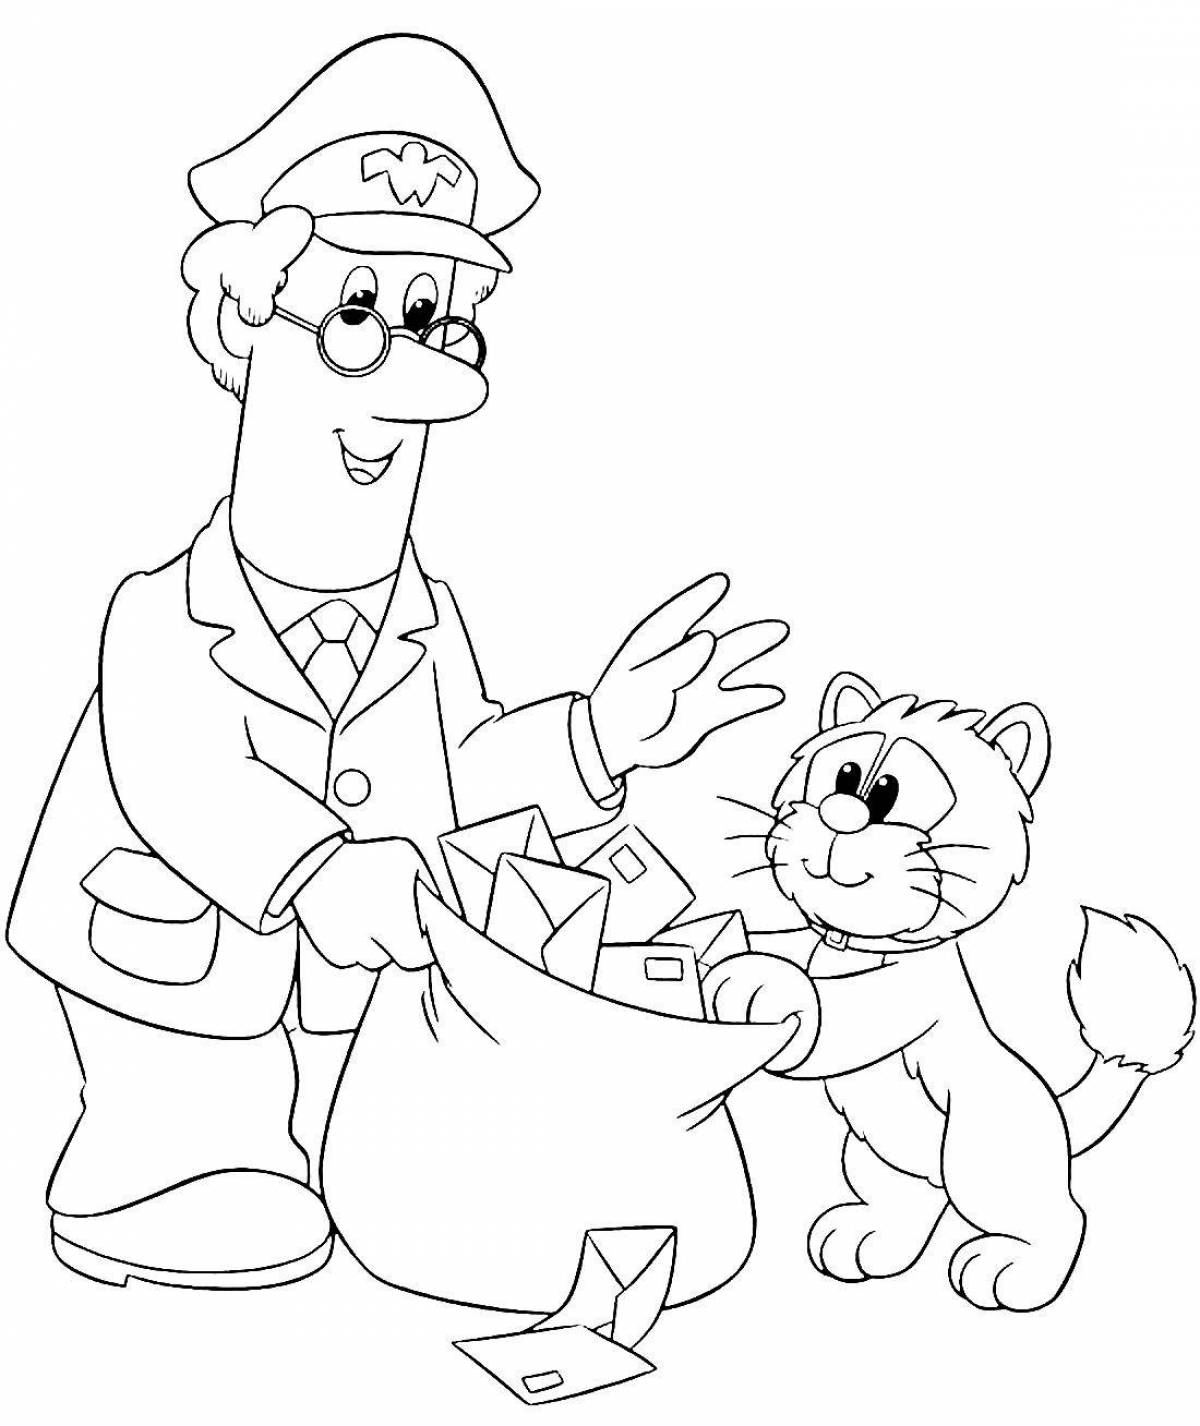 Colorful postman coloring page